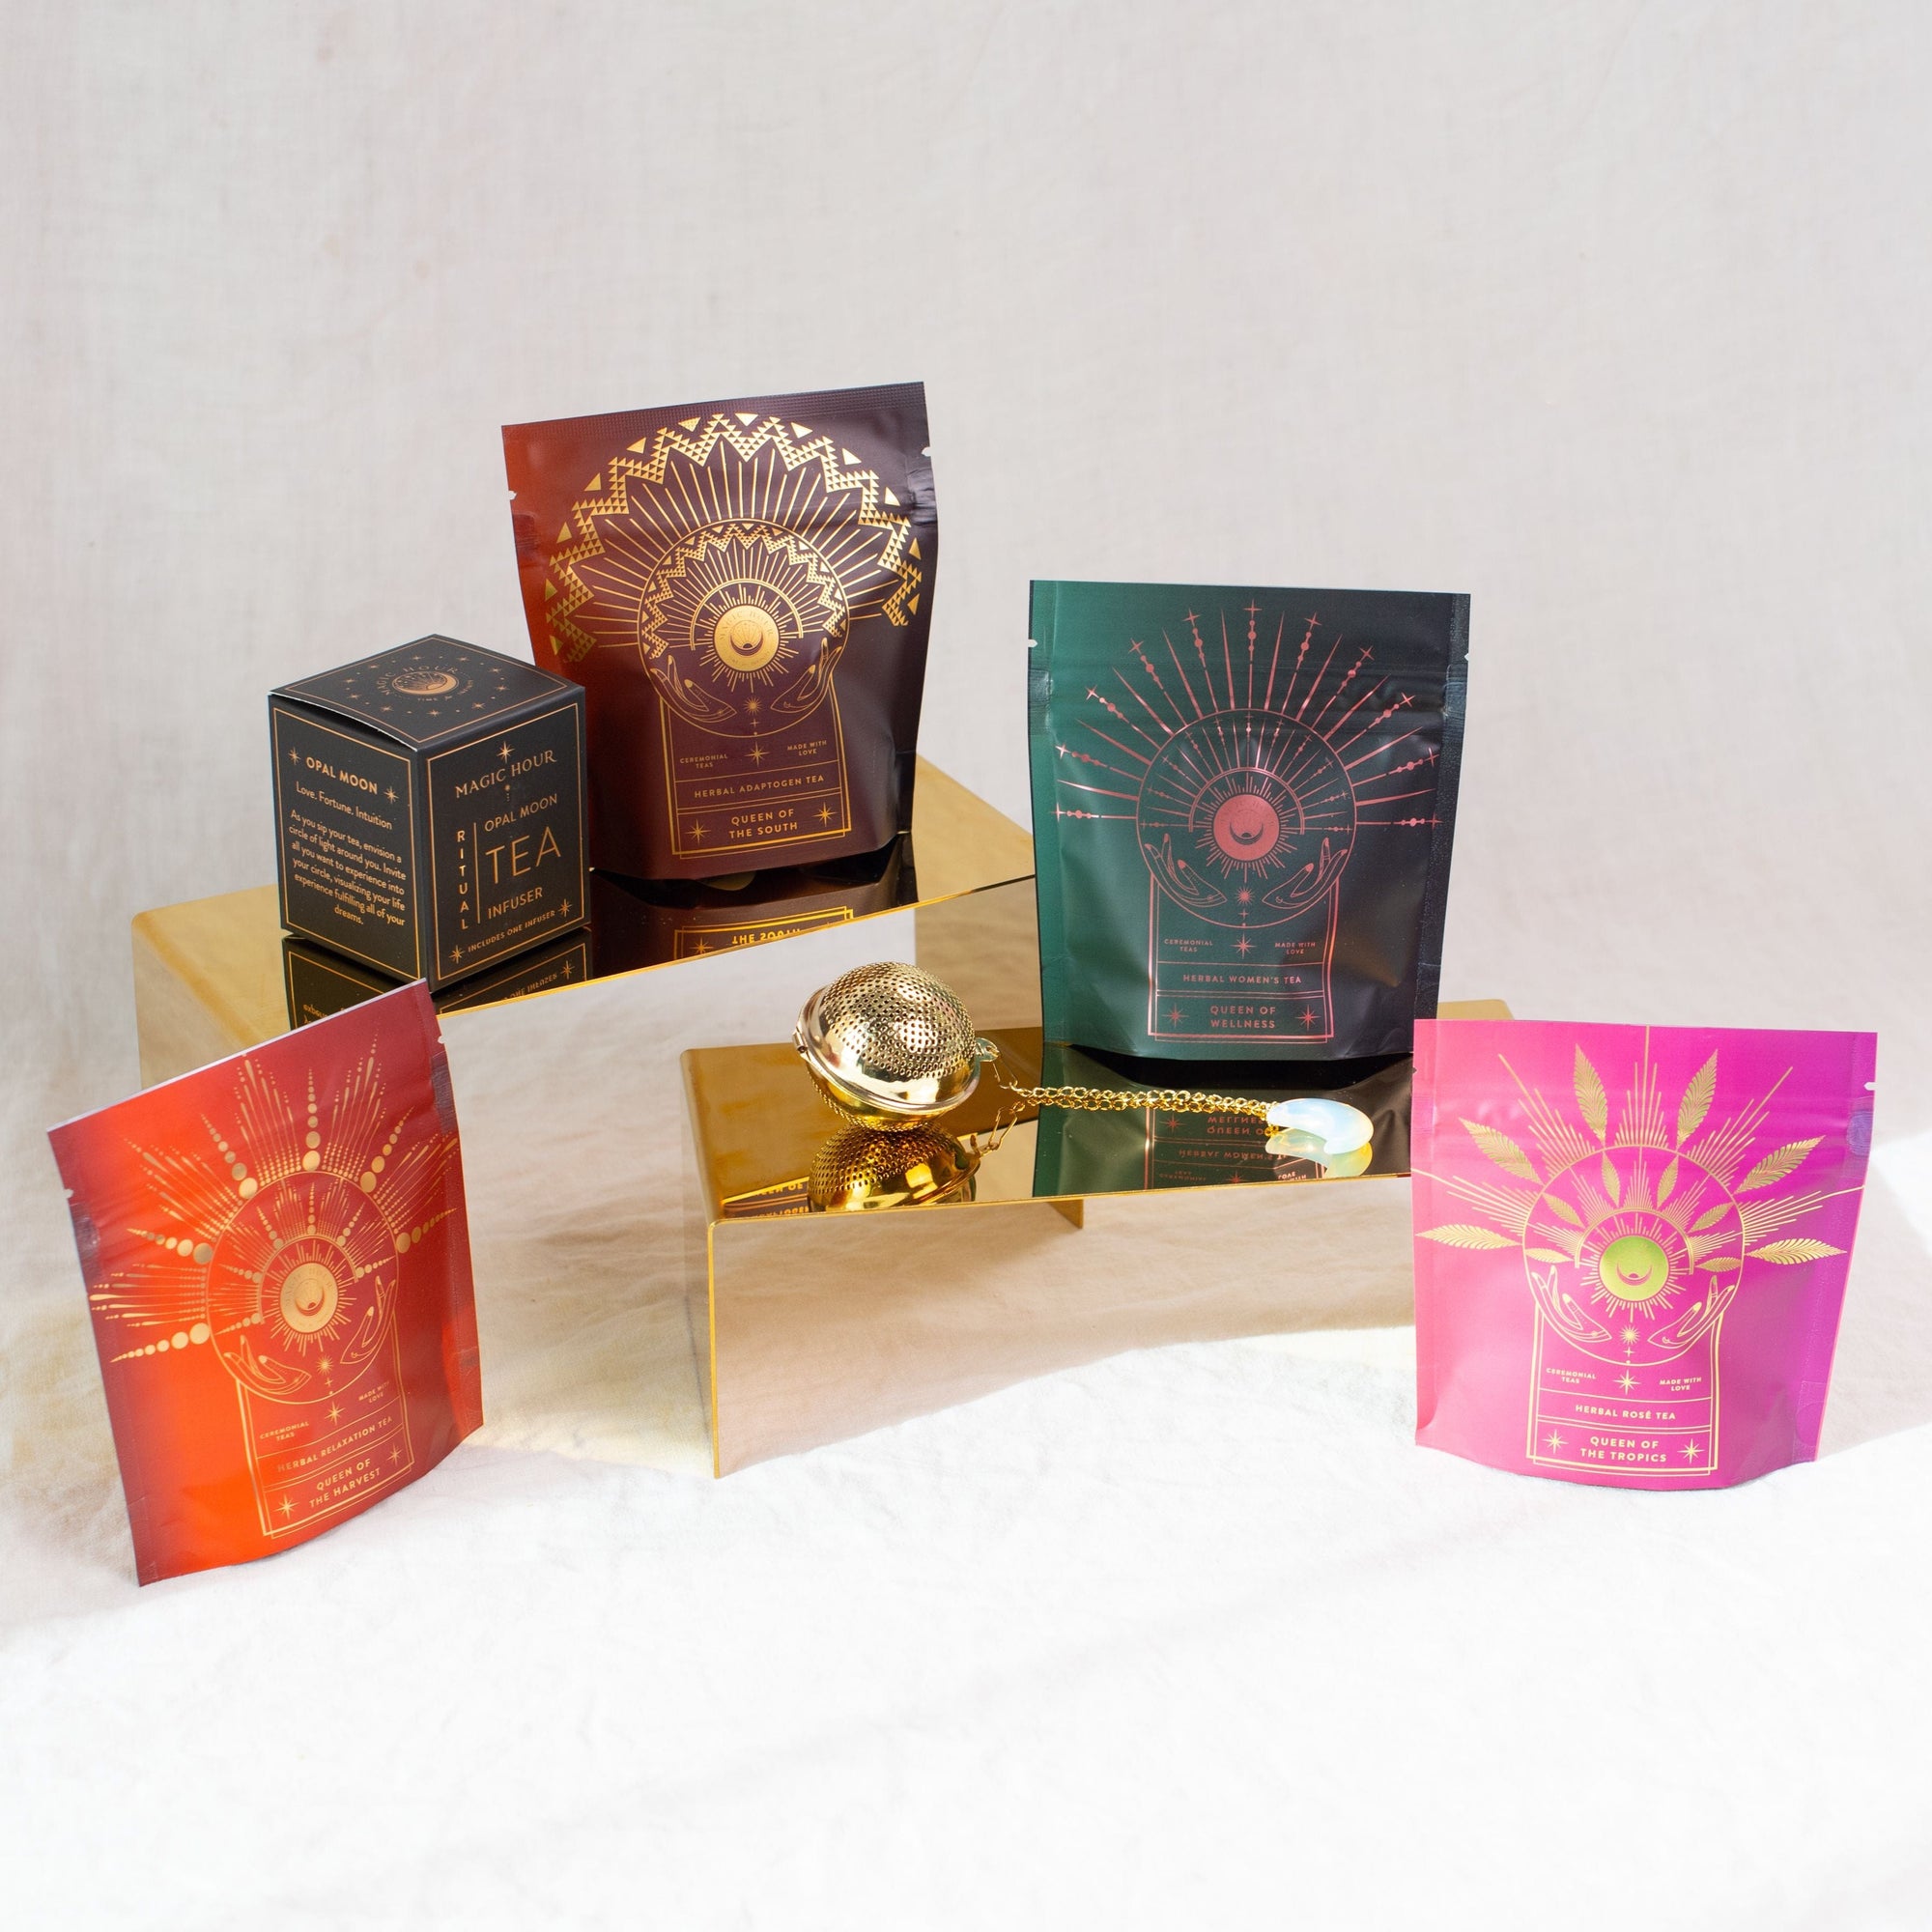 A group of four colorful tea packaging pouches with intricate designs displayed on gold platforms. There is also a gold tea infuser and a black Magic Hour box on the left side. The background is a plain, light-colored fabric, highlighting the elegance of The Queen's Sampler Set by Magic Hour.